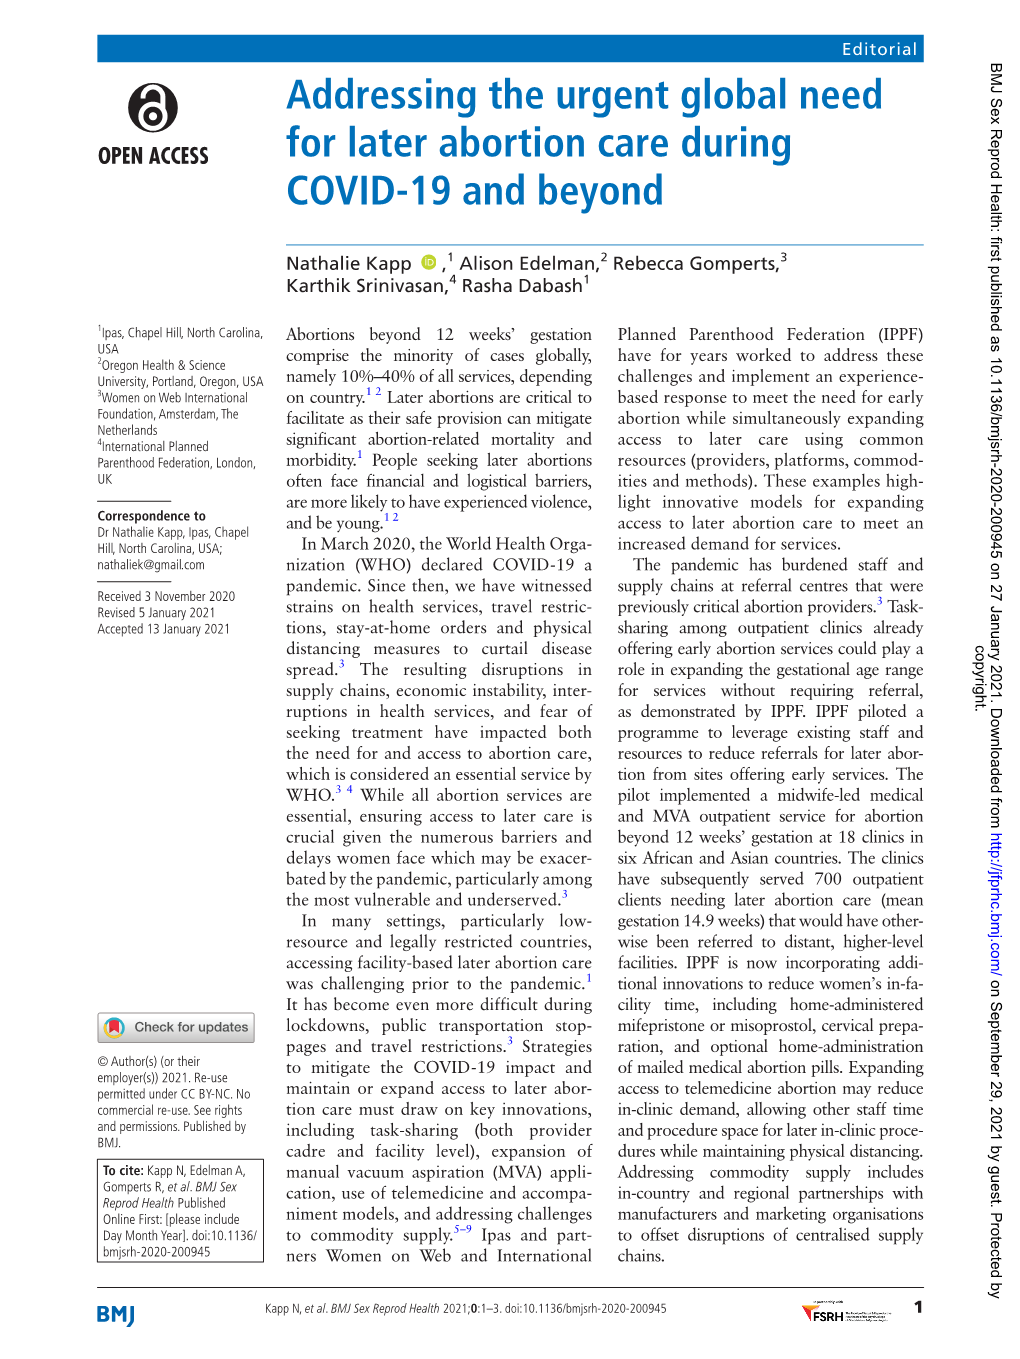 Addressing the Urgent Global Need for Later Abortion Care During COVID-19 and Beyond